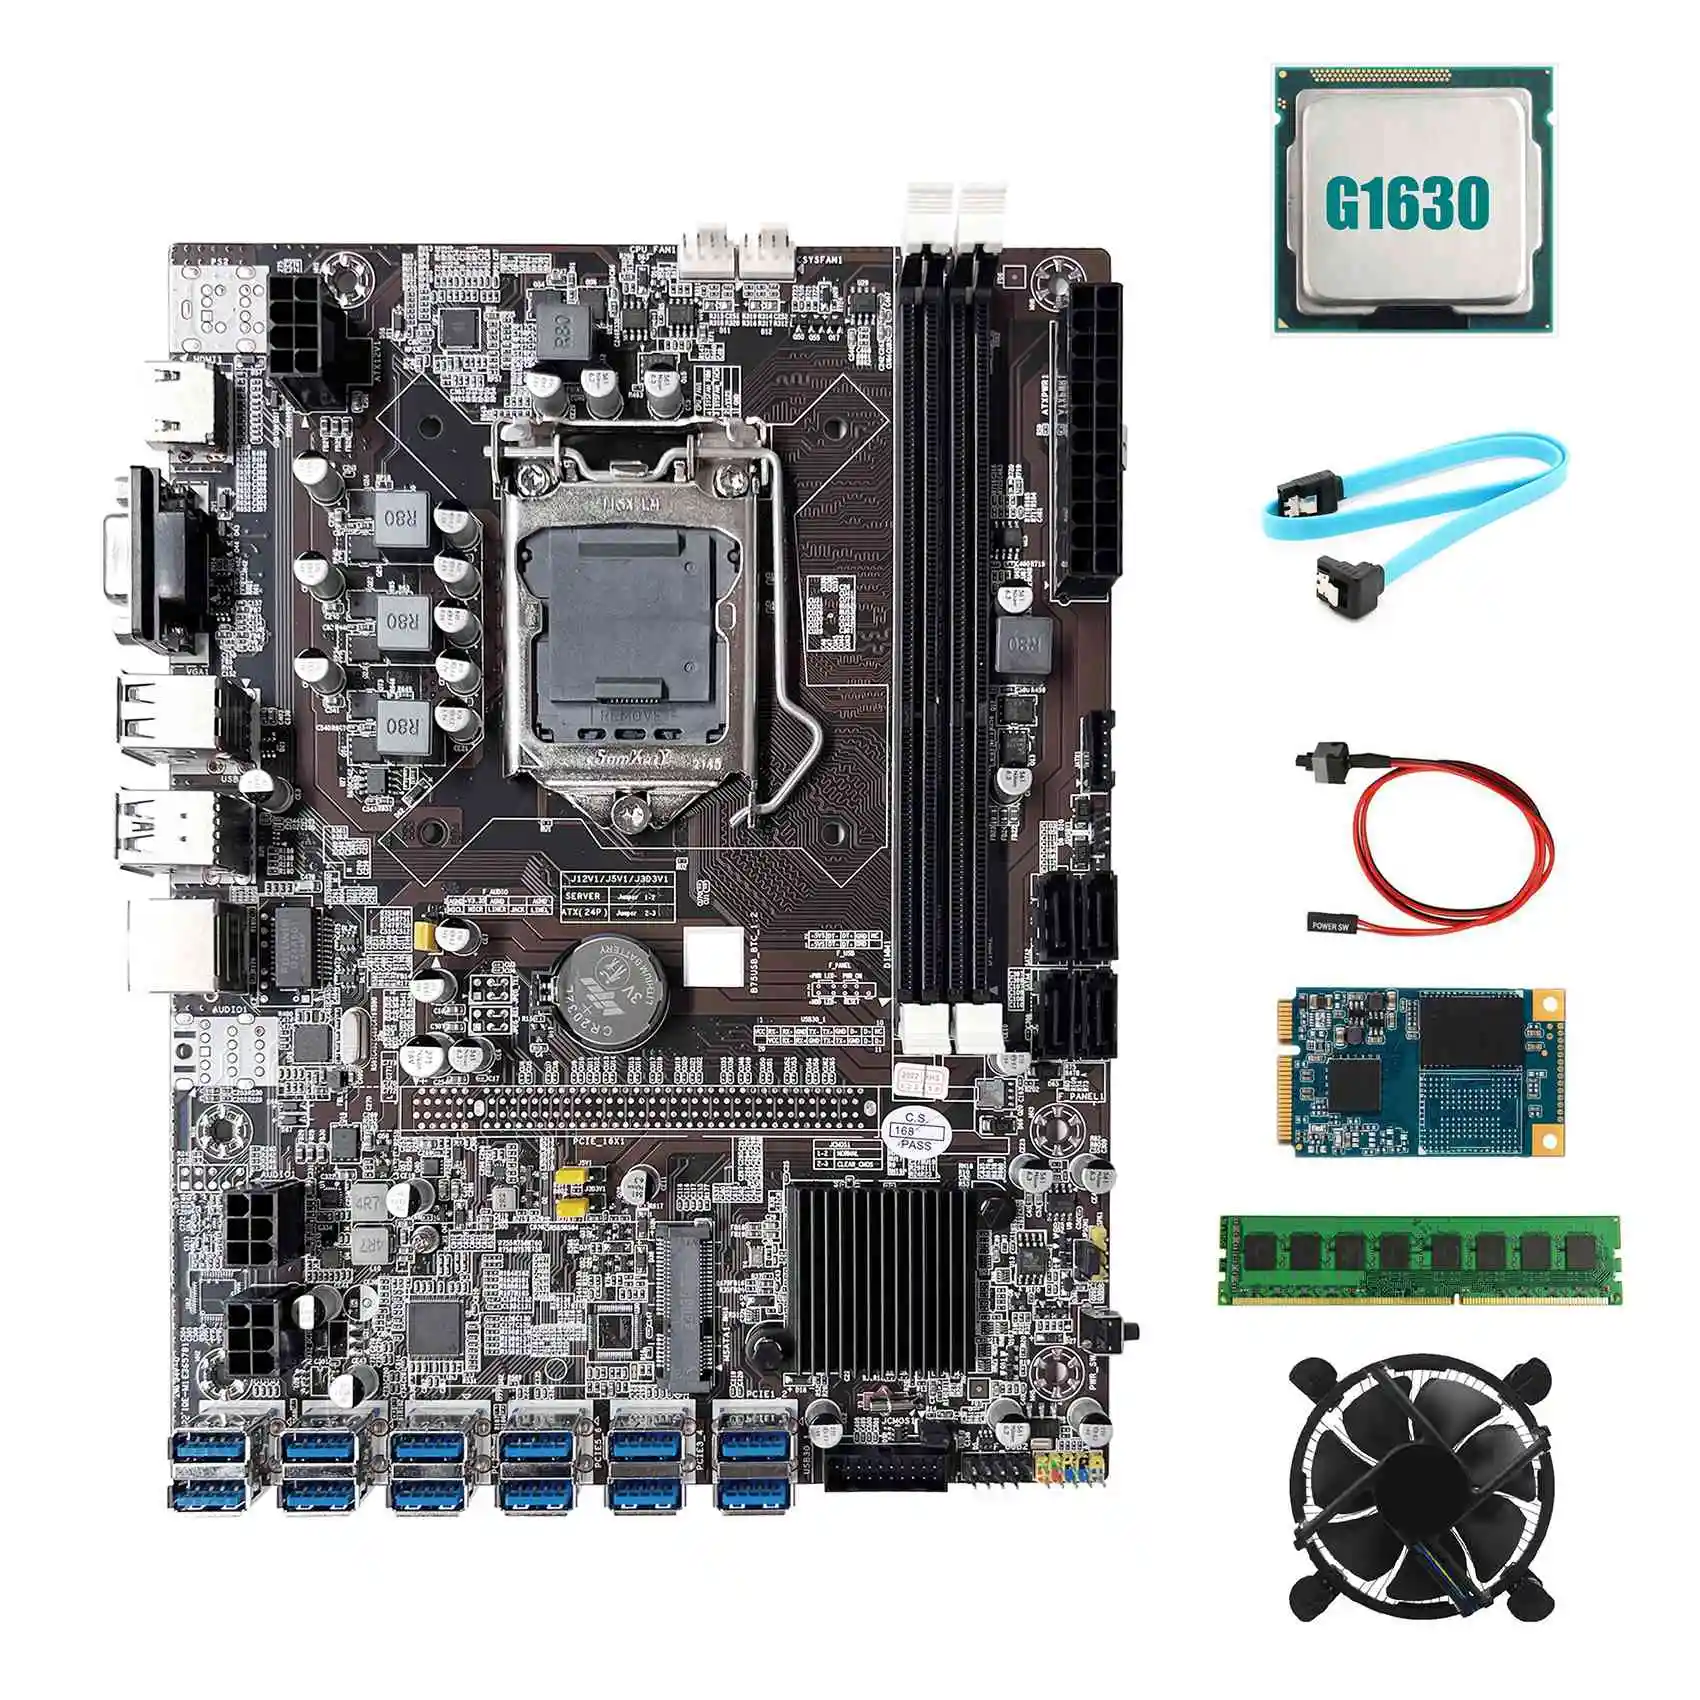 

B75 ETH Mining Motherboard 12XPCIE to USB+G1630 CPU+DDR3 4GB RAM+64G SSD+Fan+SATA Cable+Switch Cable LGA1155 Motherboard